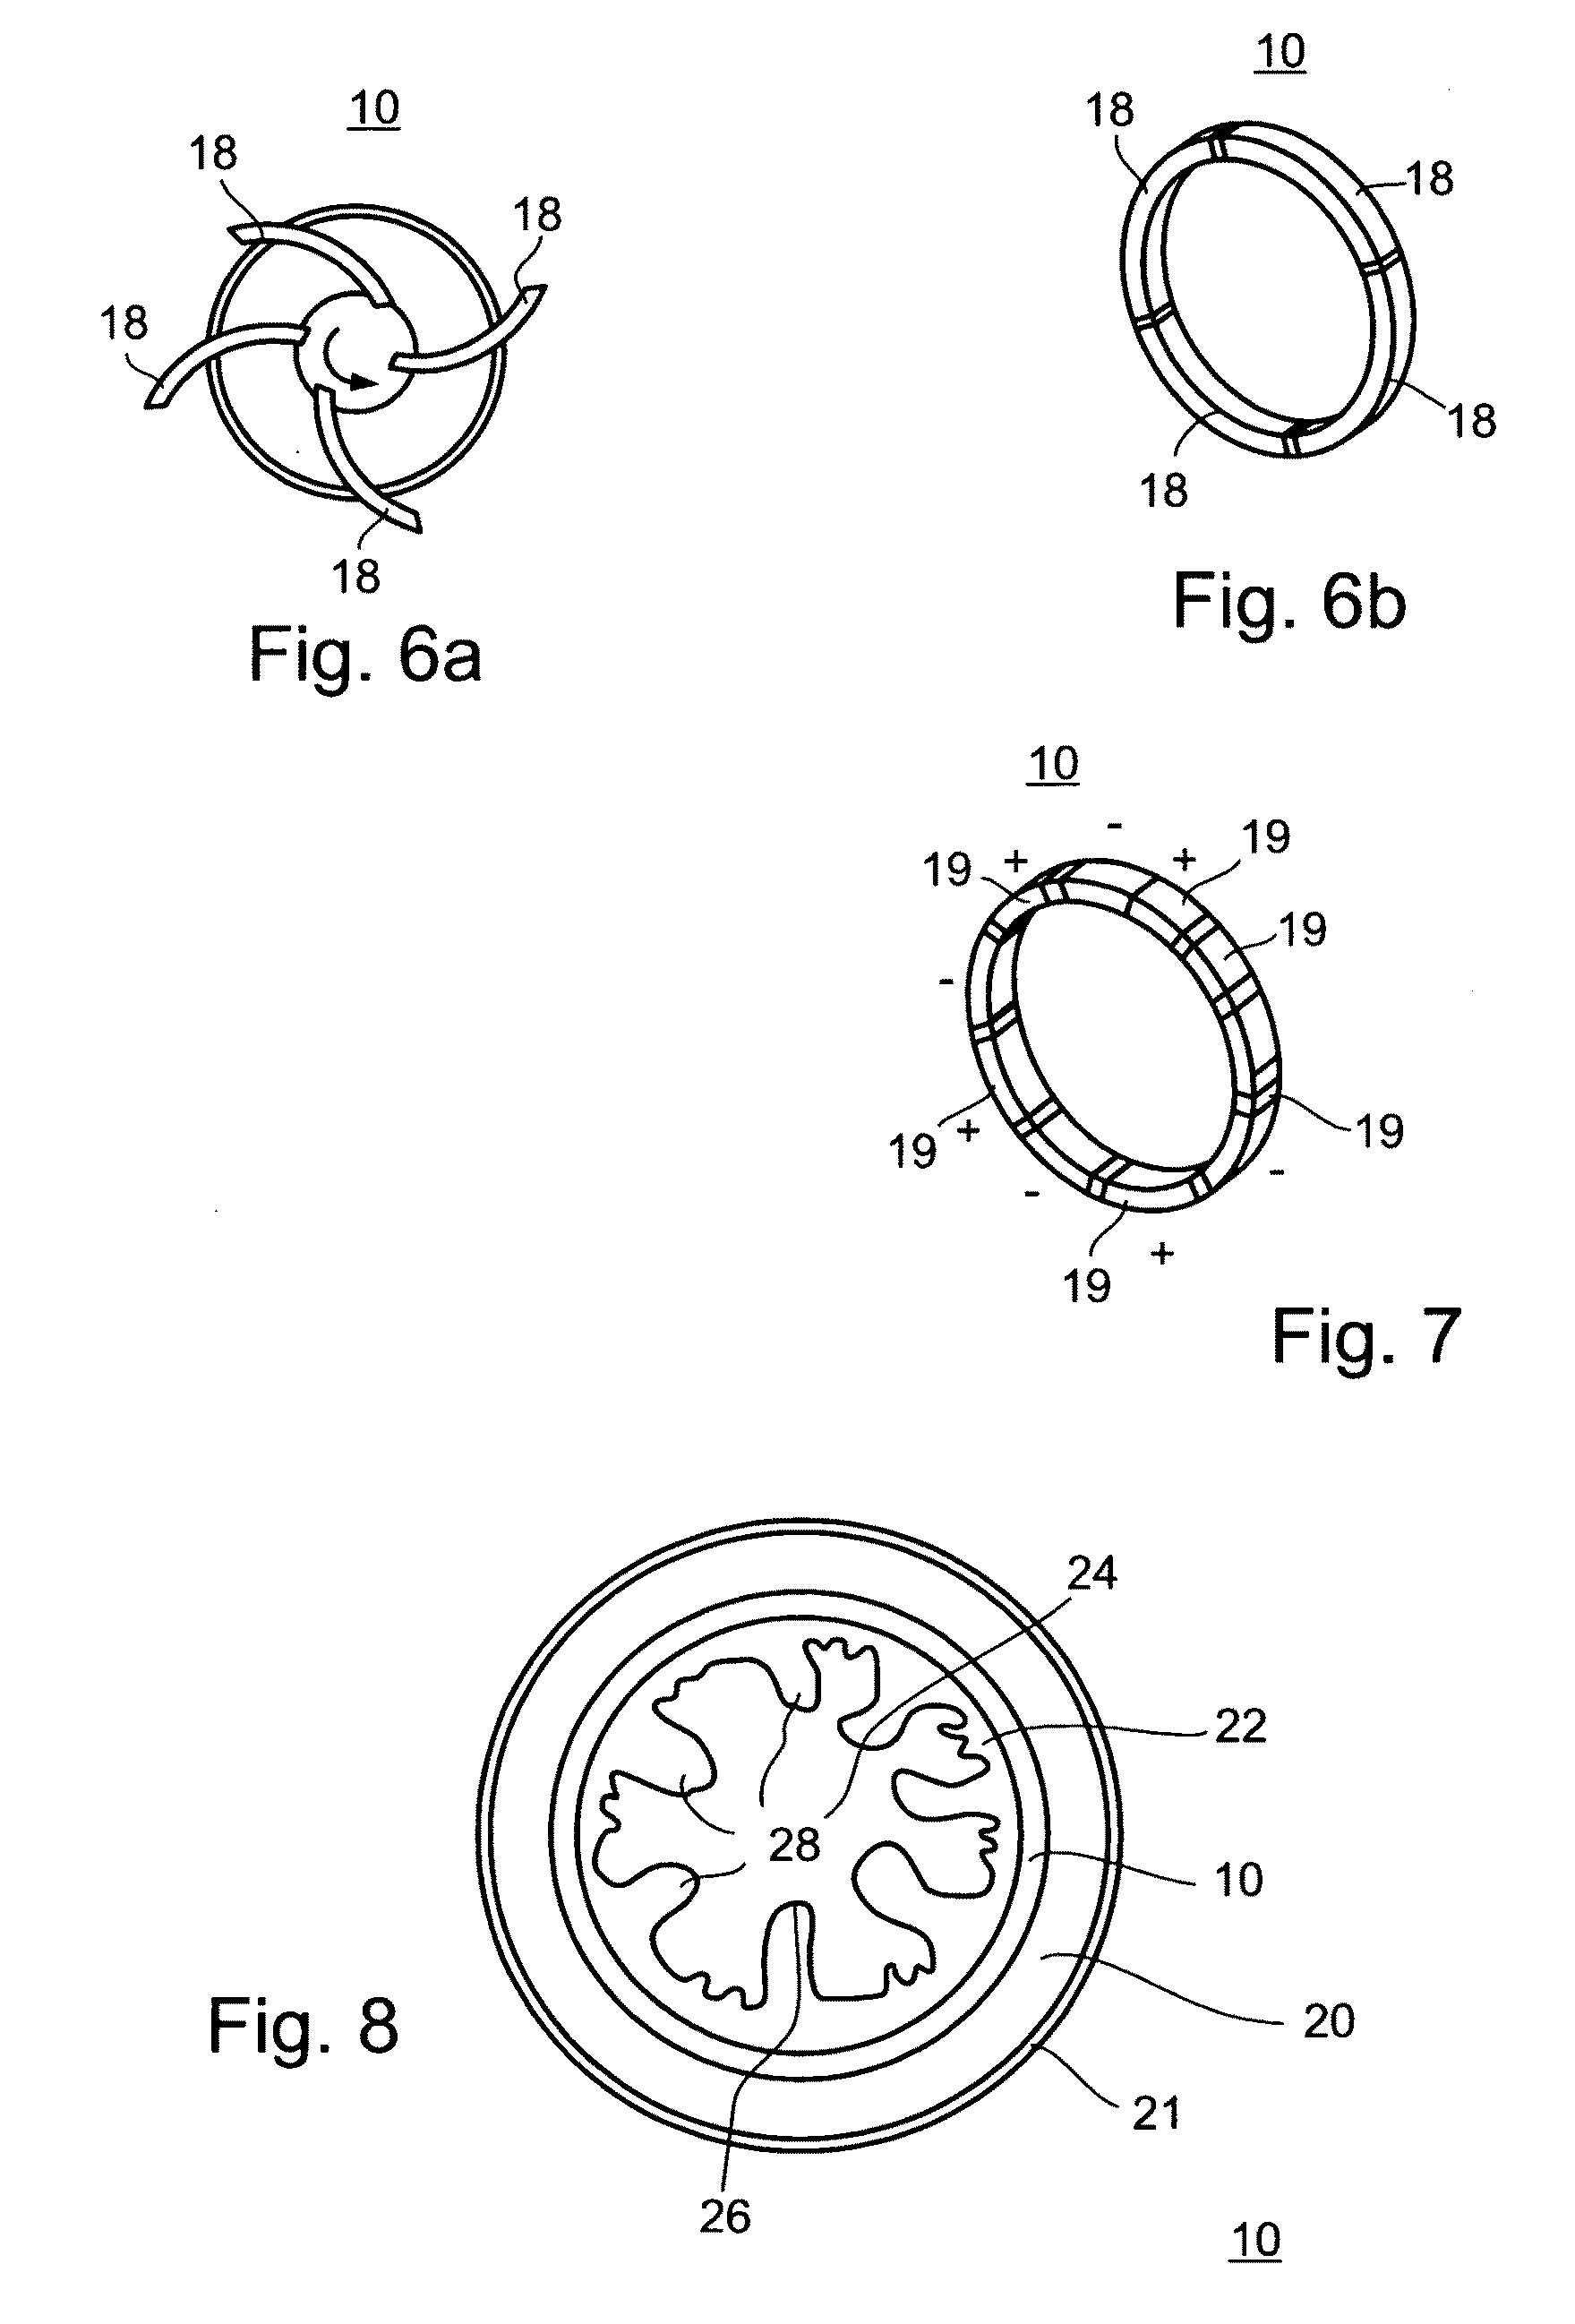 Pyloric Devices and Methods